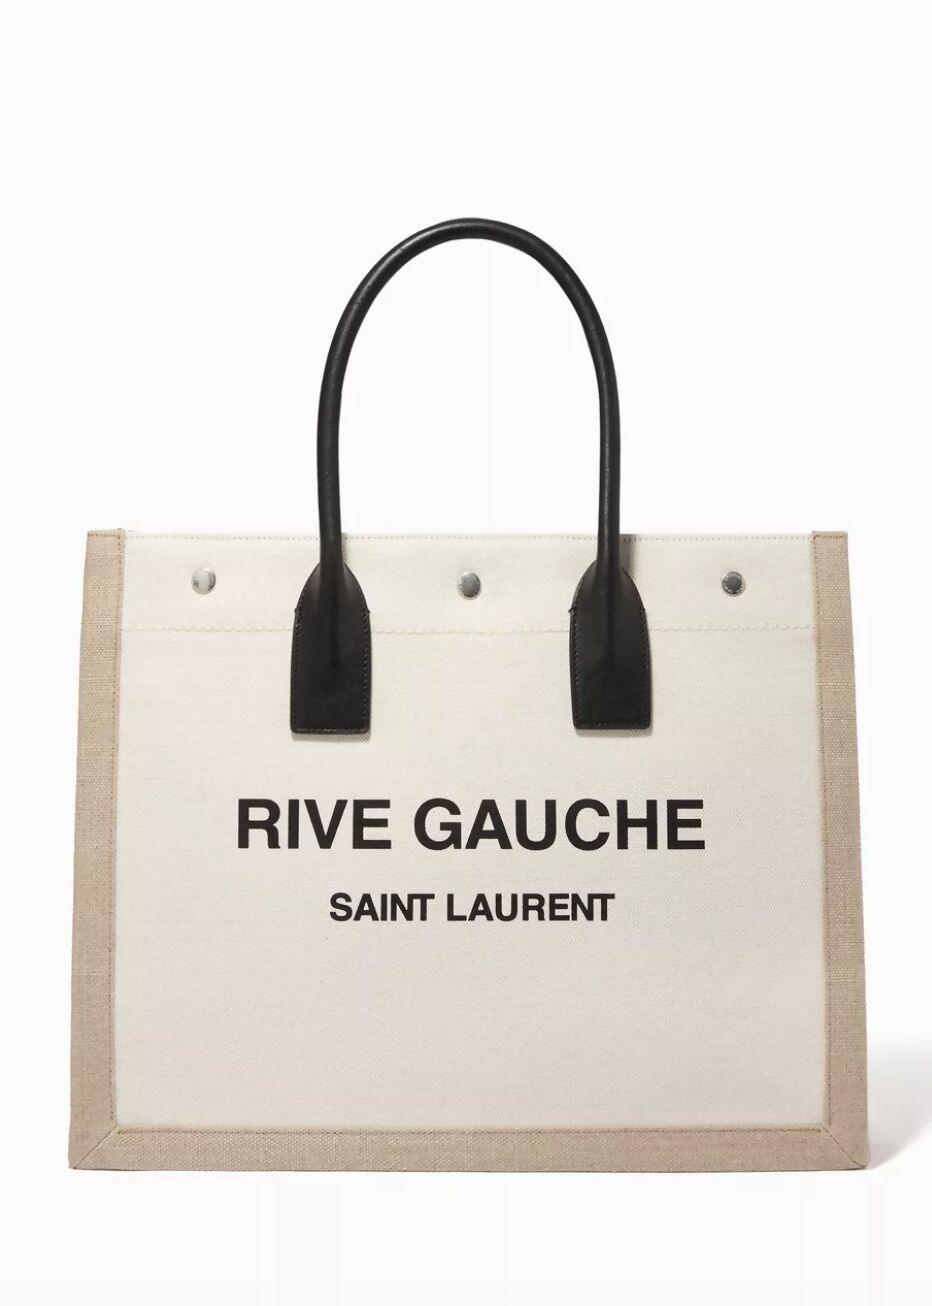 Rive Gauche Tote Bag in Linen & Leather - Endless